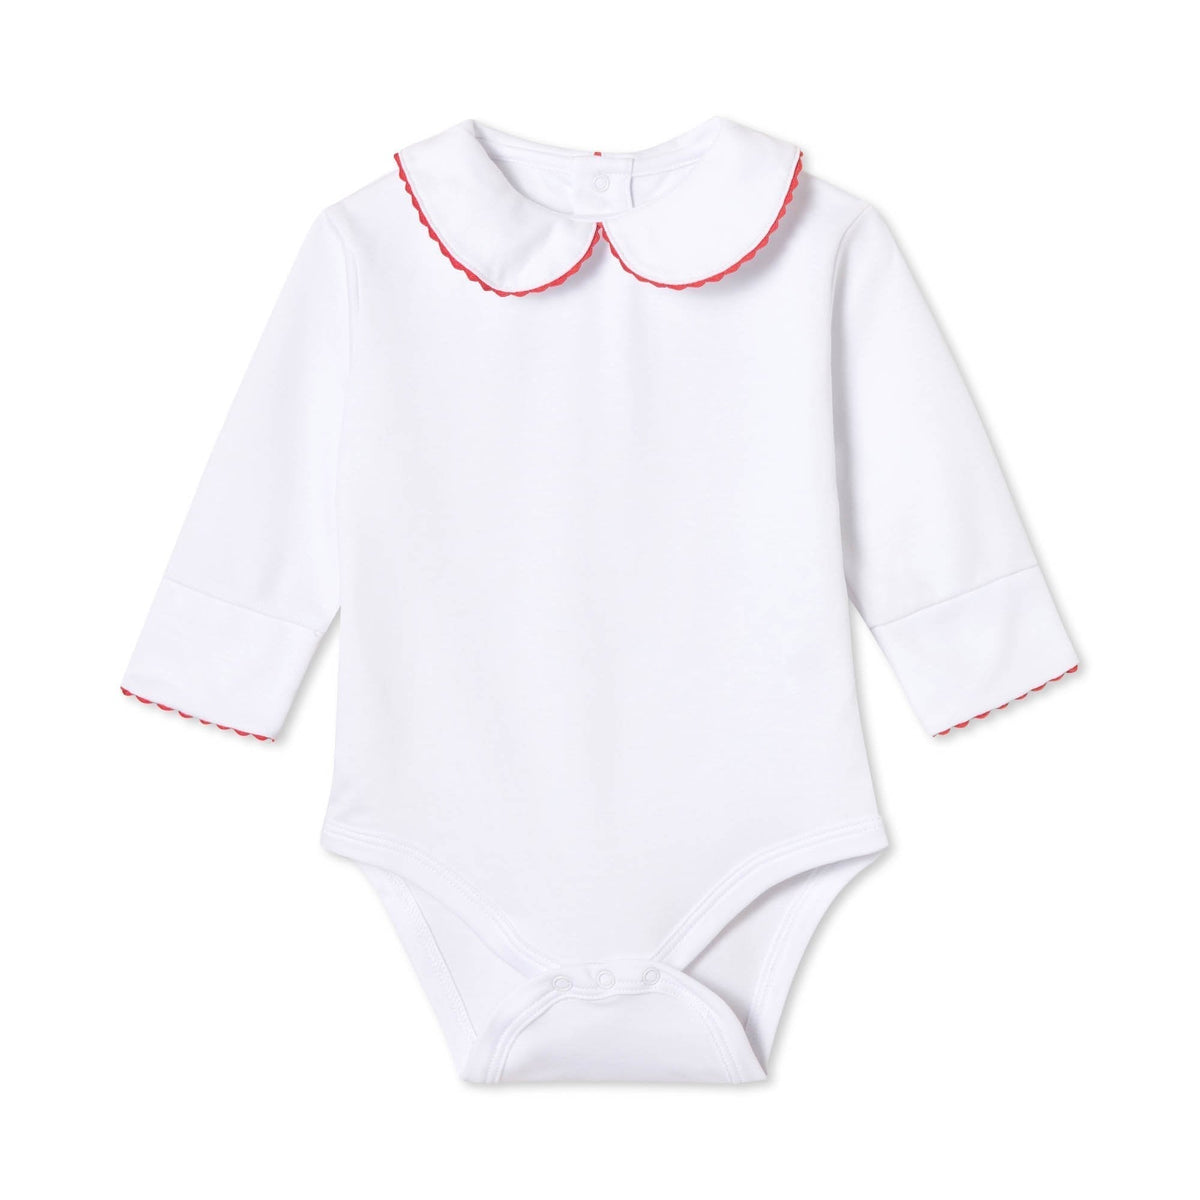 Classic and Preppy Izzy Long Sleeve Onesie, White with Crimson Ric Rac-Baby Rompers-Bright White with Crimson Ric Rac-0-3M-CPC - Classic Prep Childrenswear